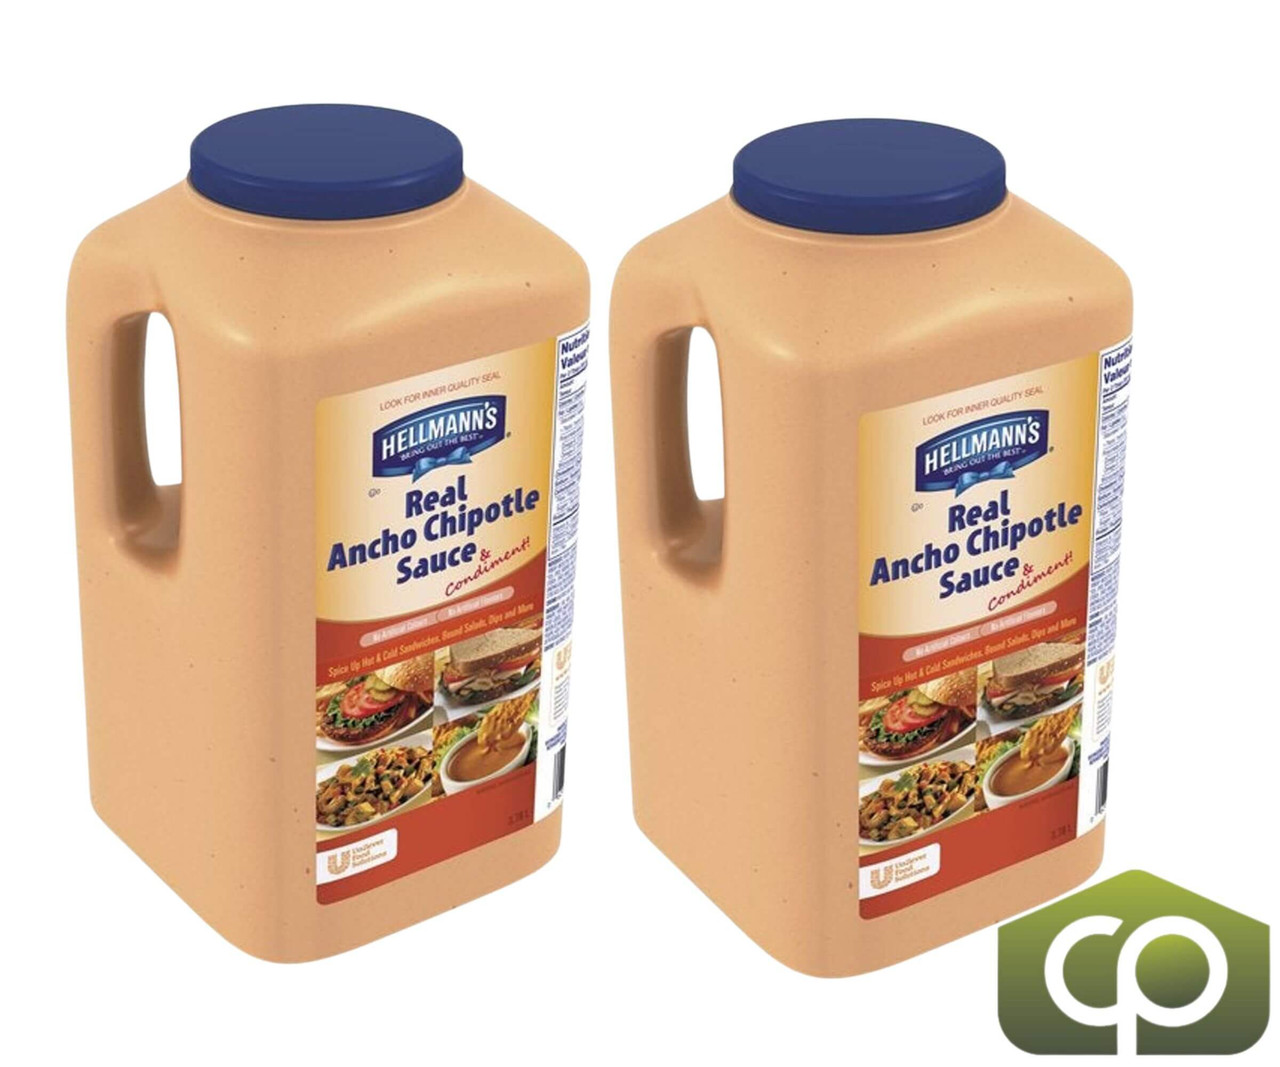 Hellmanns Real Ancho Chipotle Sauce - 3.78 l